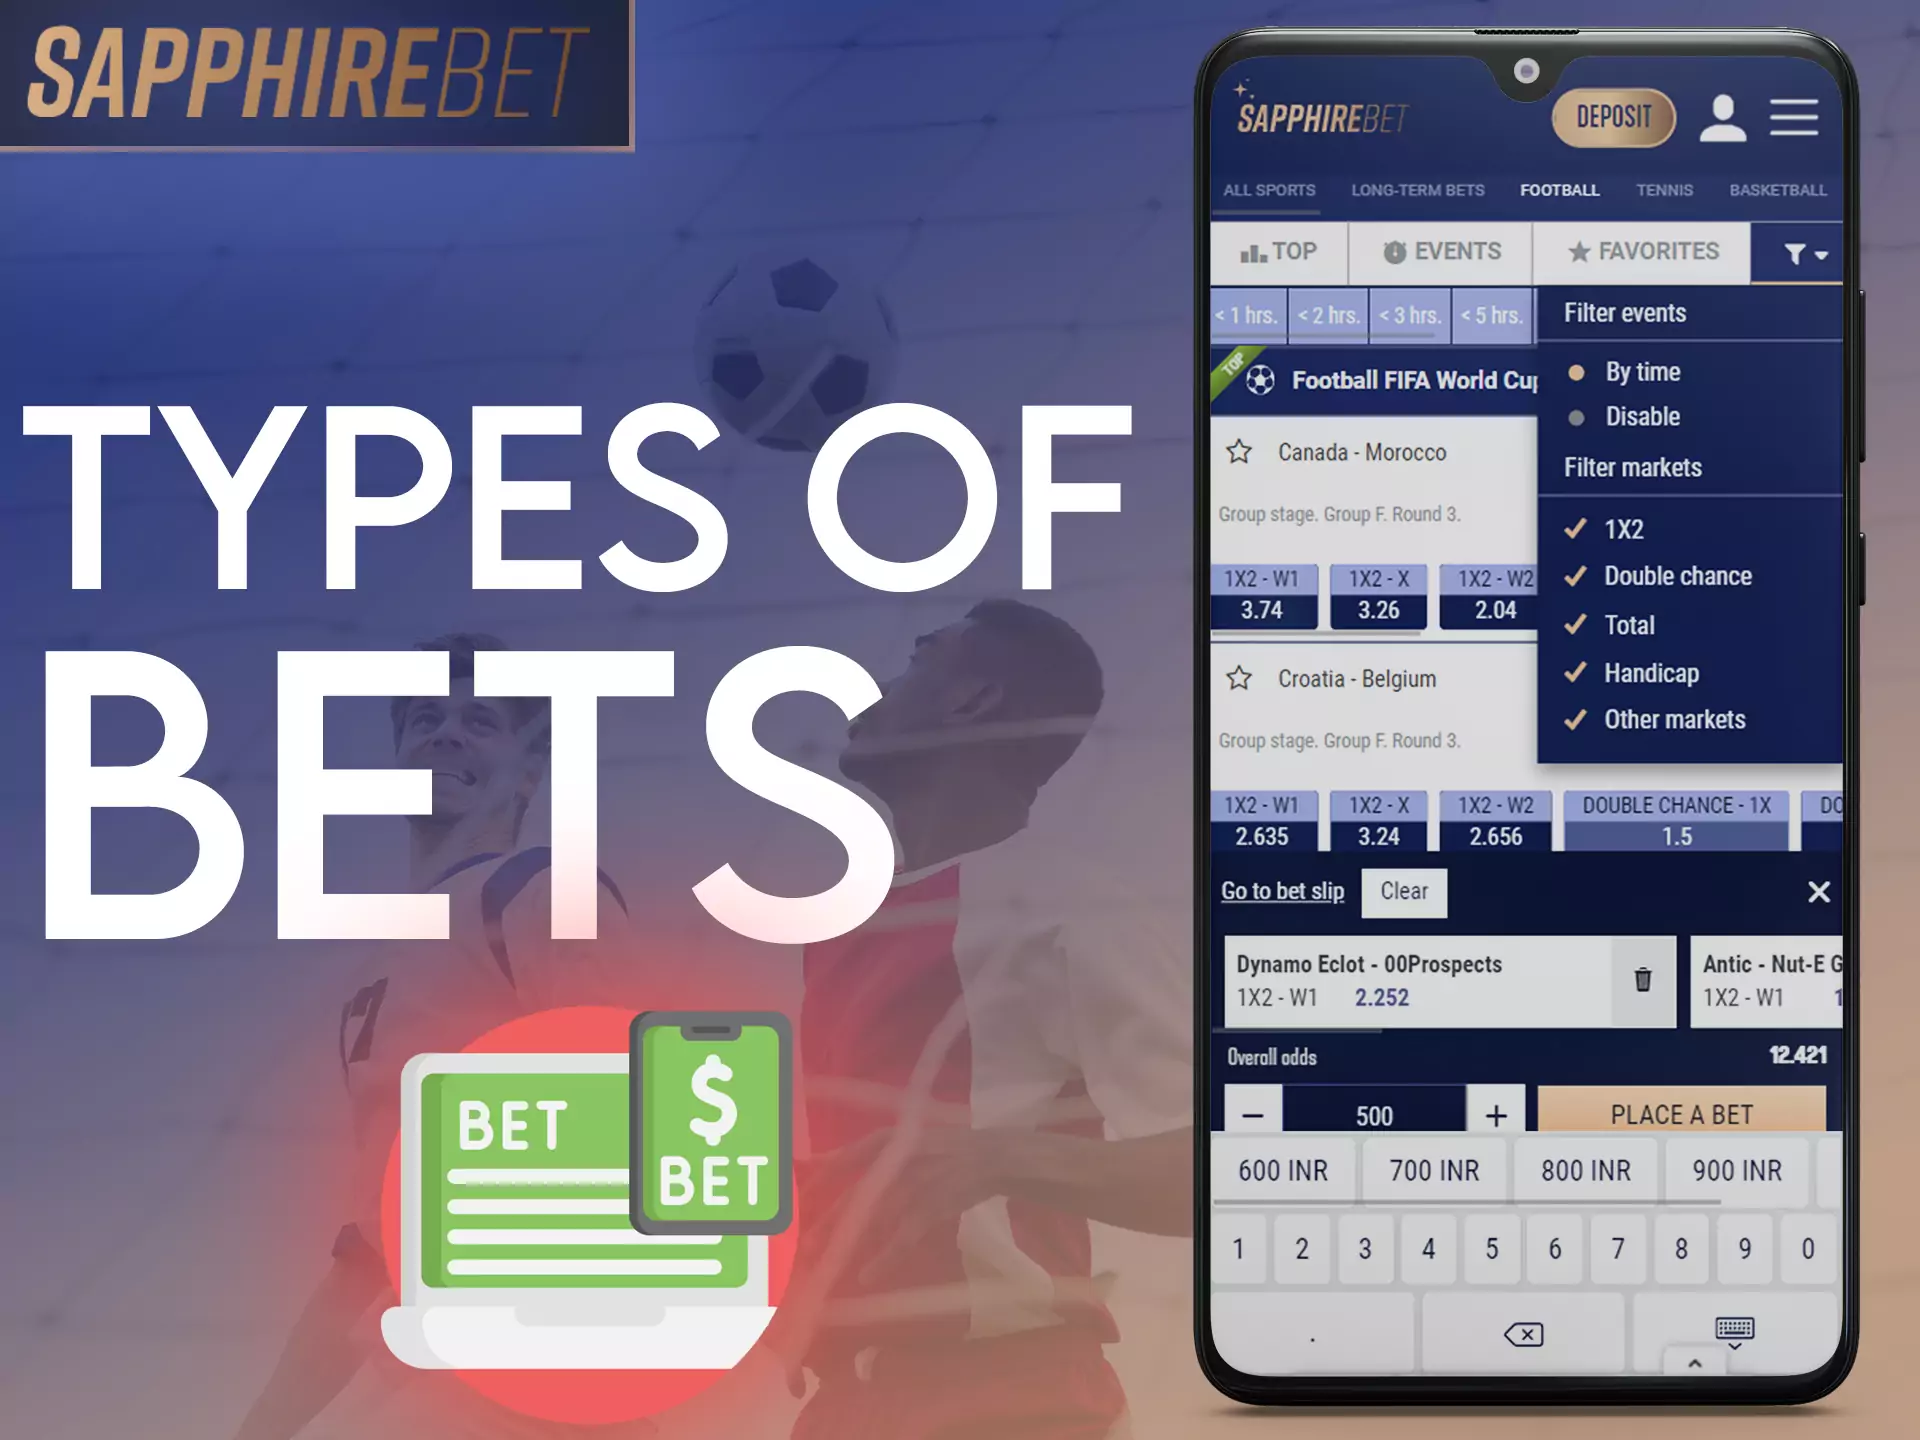 In Sapphirebet, try different types of bets in the app.